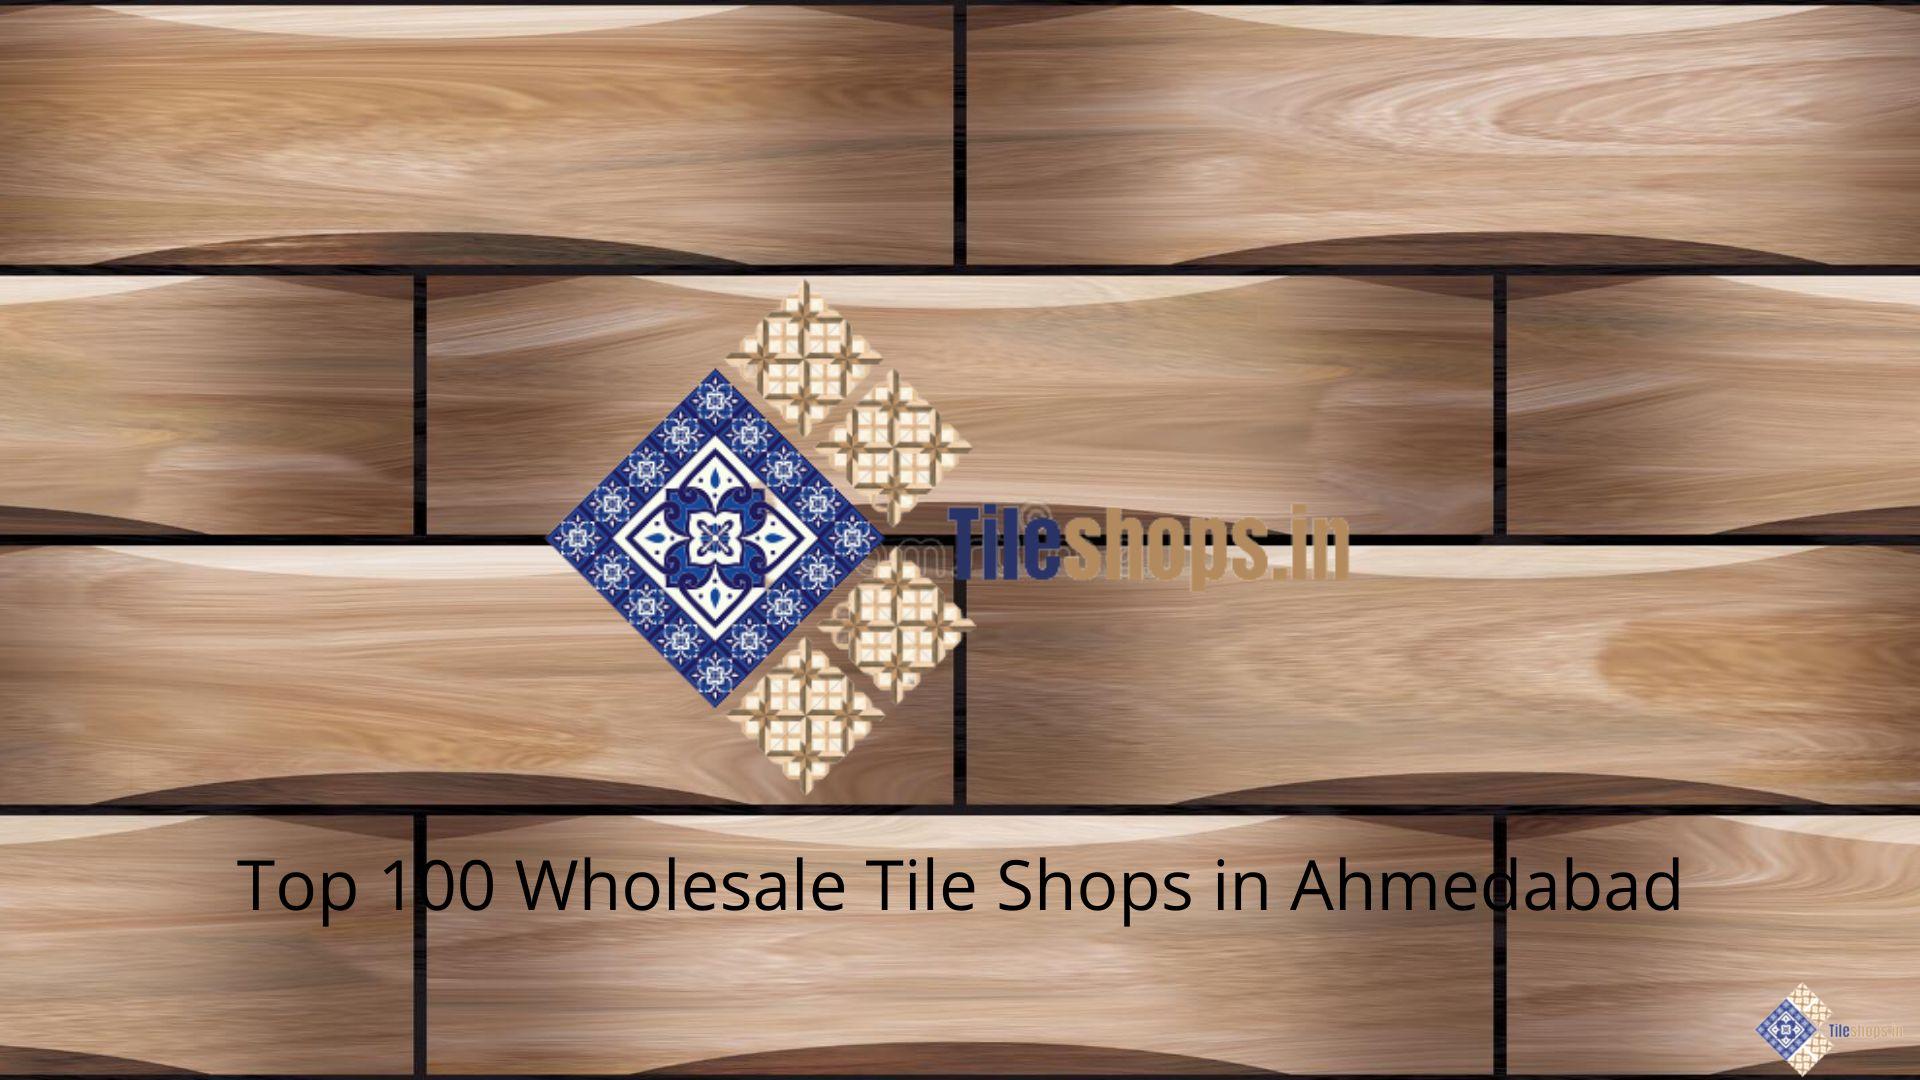 Top 100 Wholesale Tile Shops in Ahmedabad